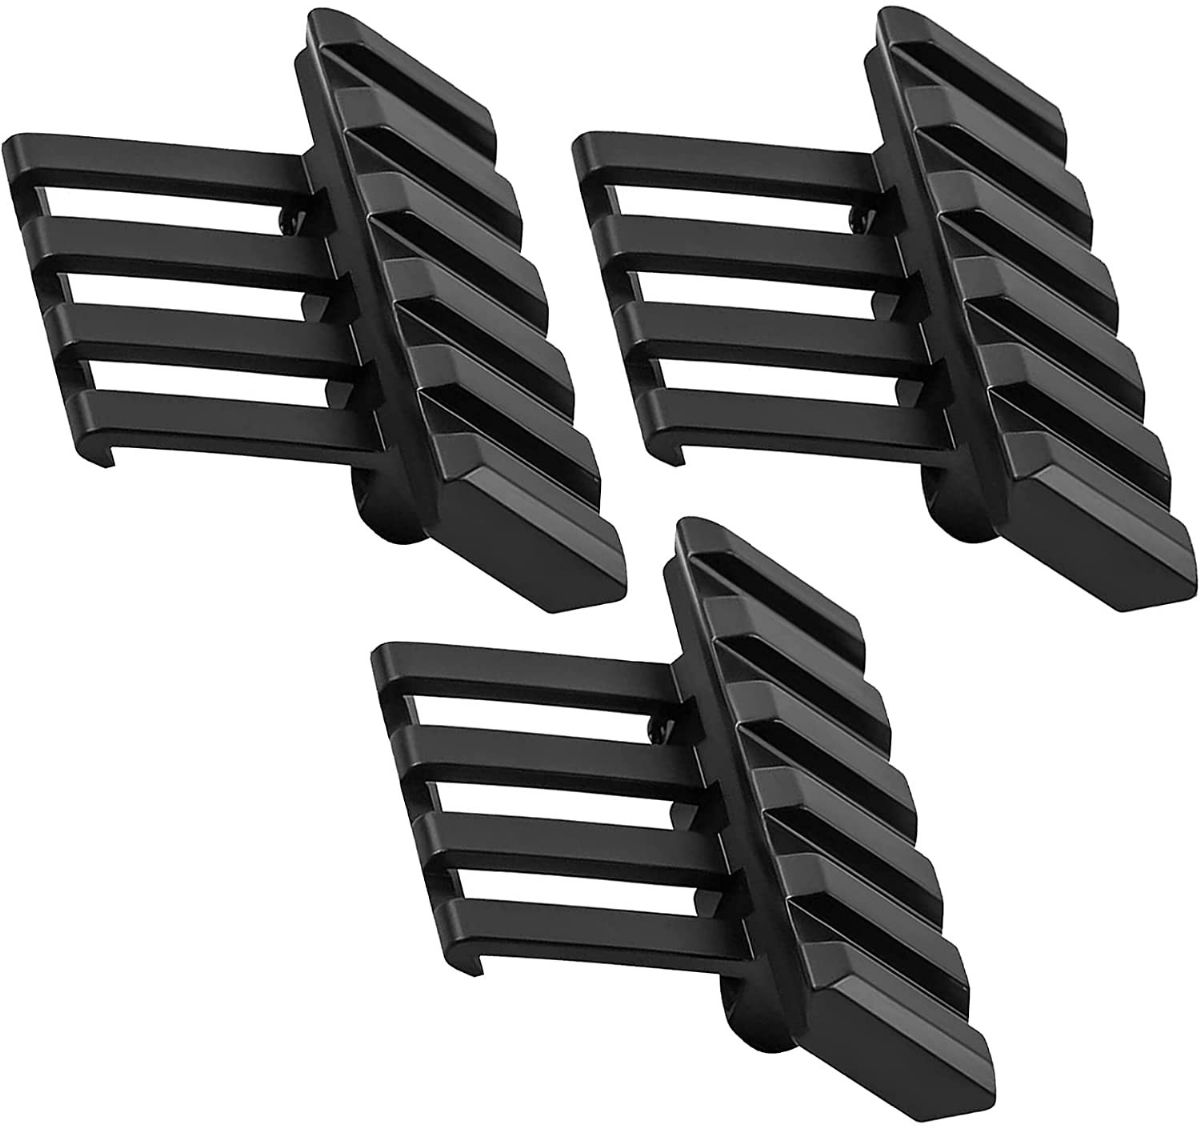 3-Pack Offset Rail Mount for 20mm Rail 5 Slots Rail Mount Adapter for Sight